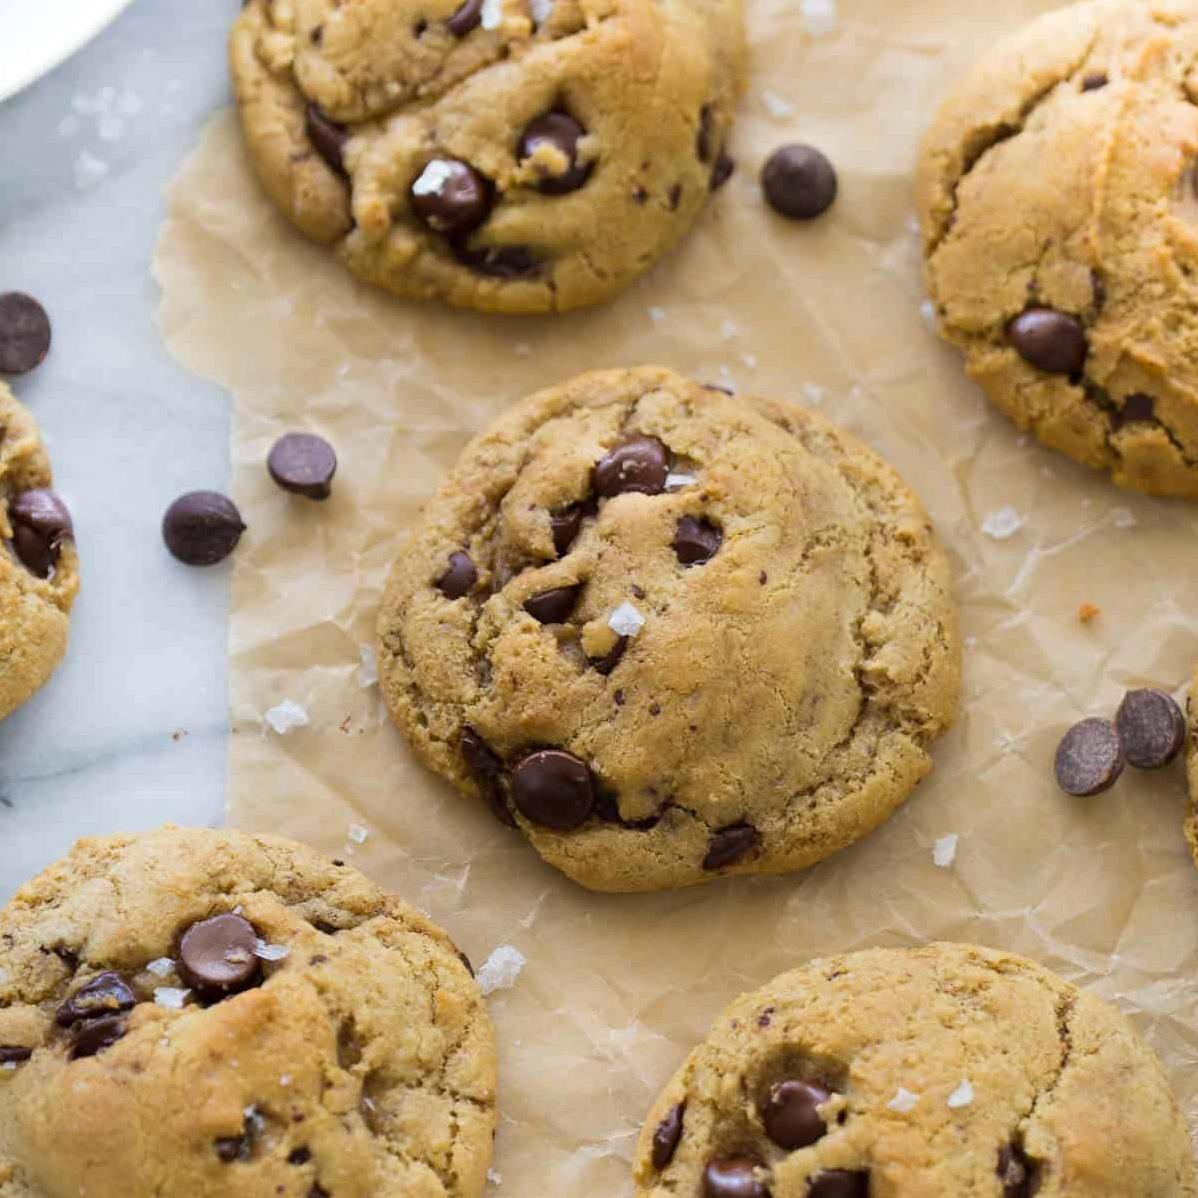  Who said gluten-free had to be boring? These cookies are anything but!